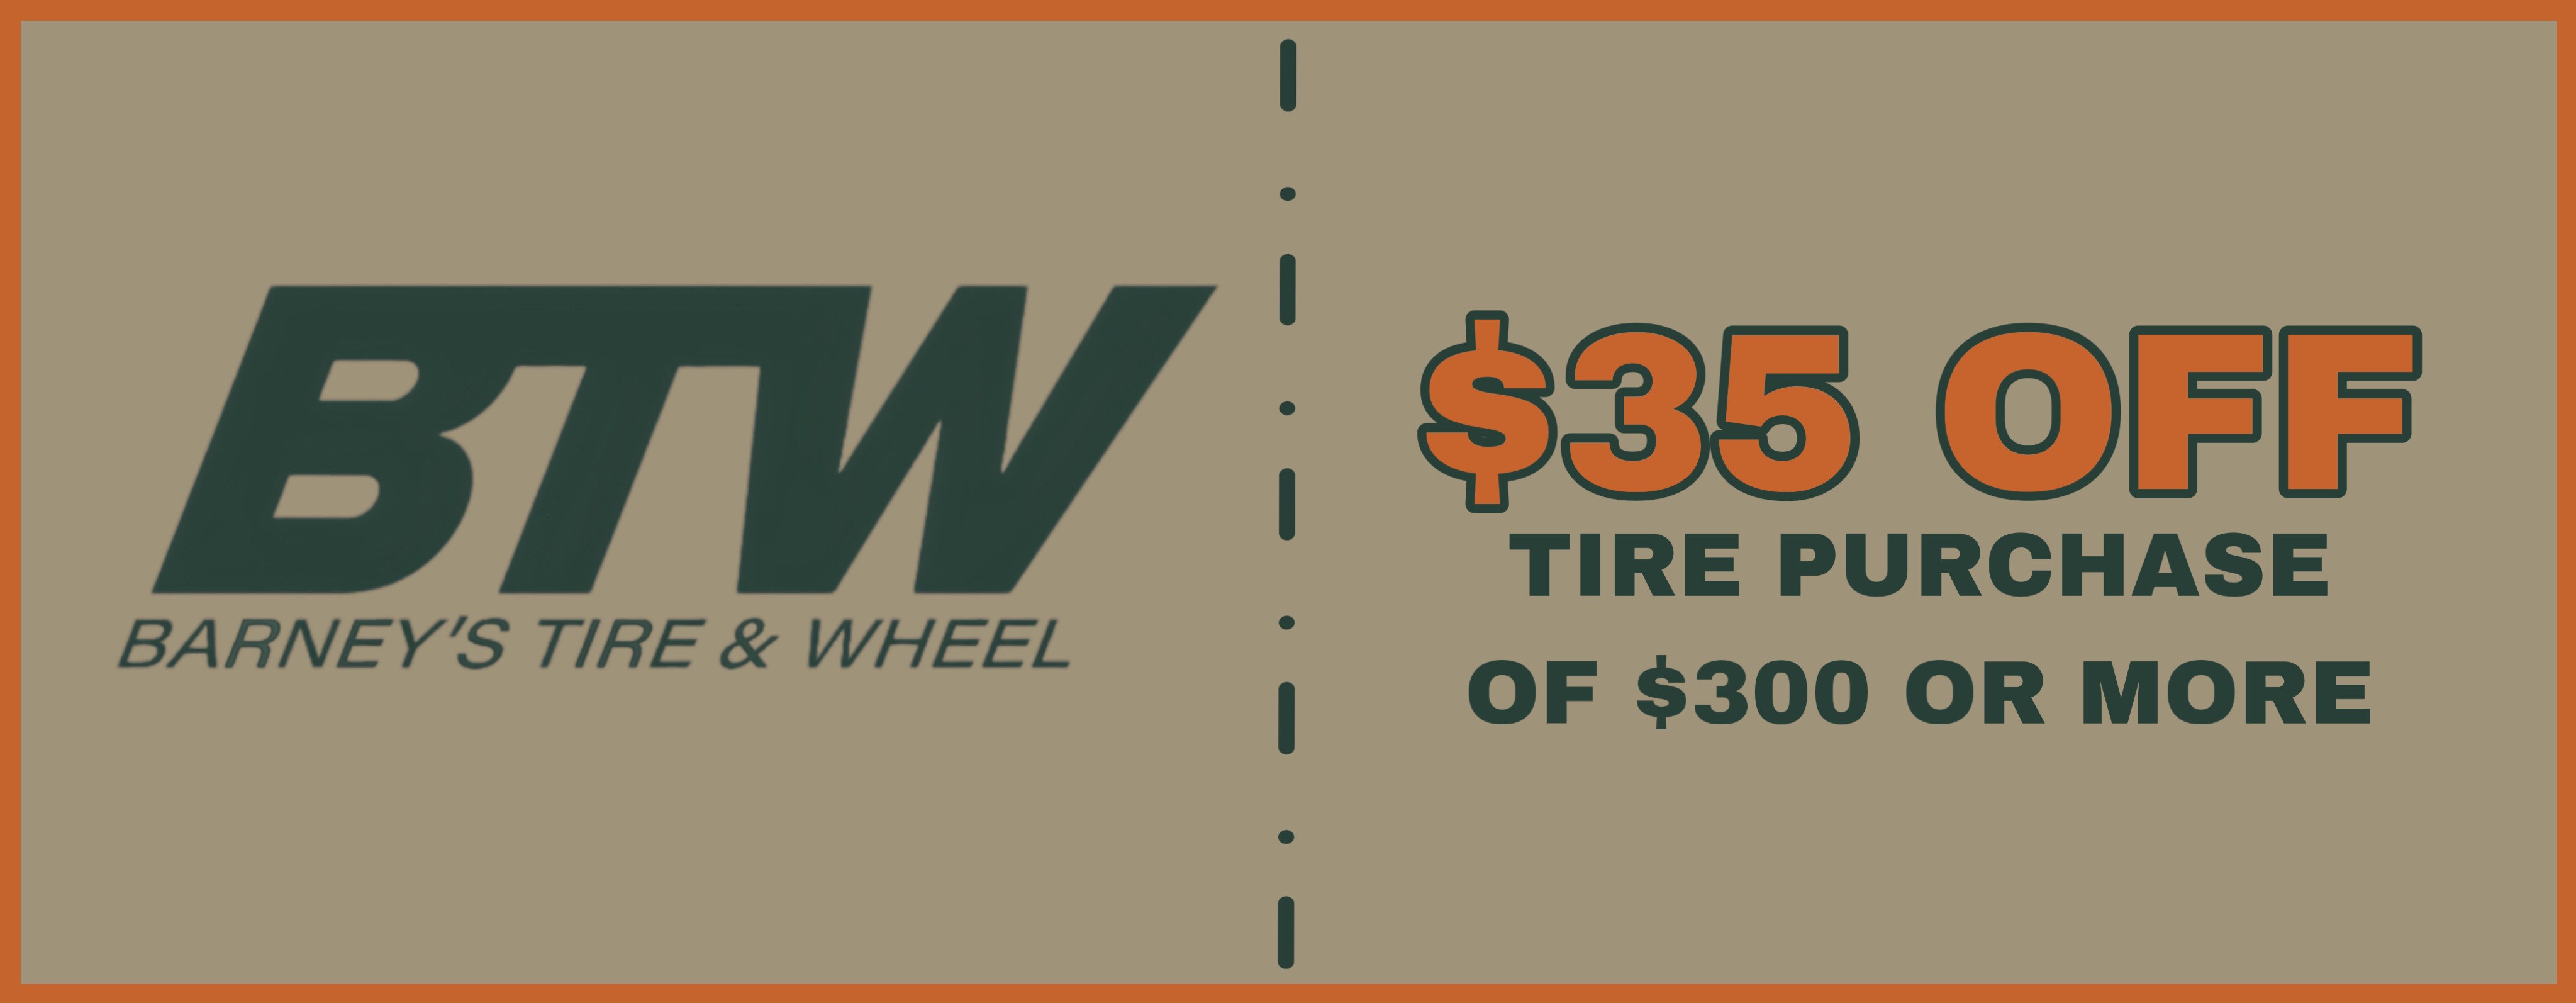 $35 Off Tire Purchase Special